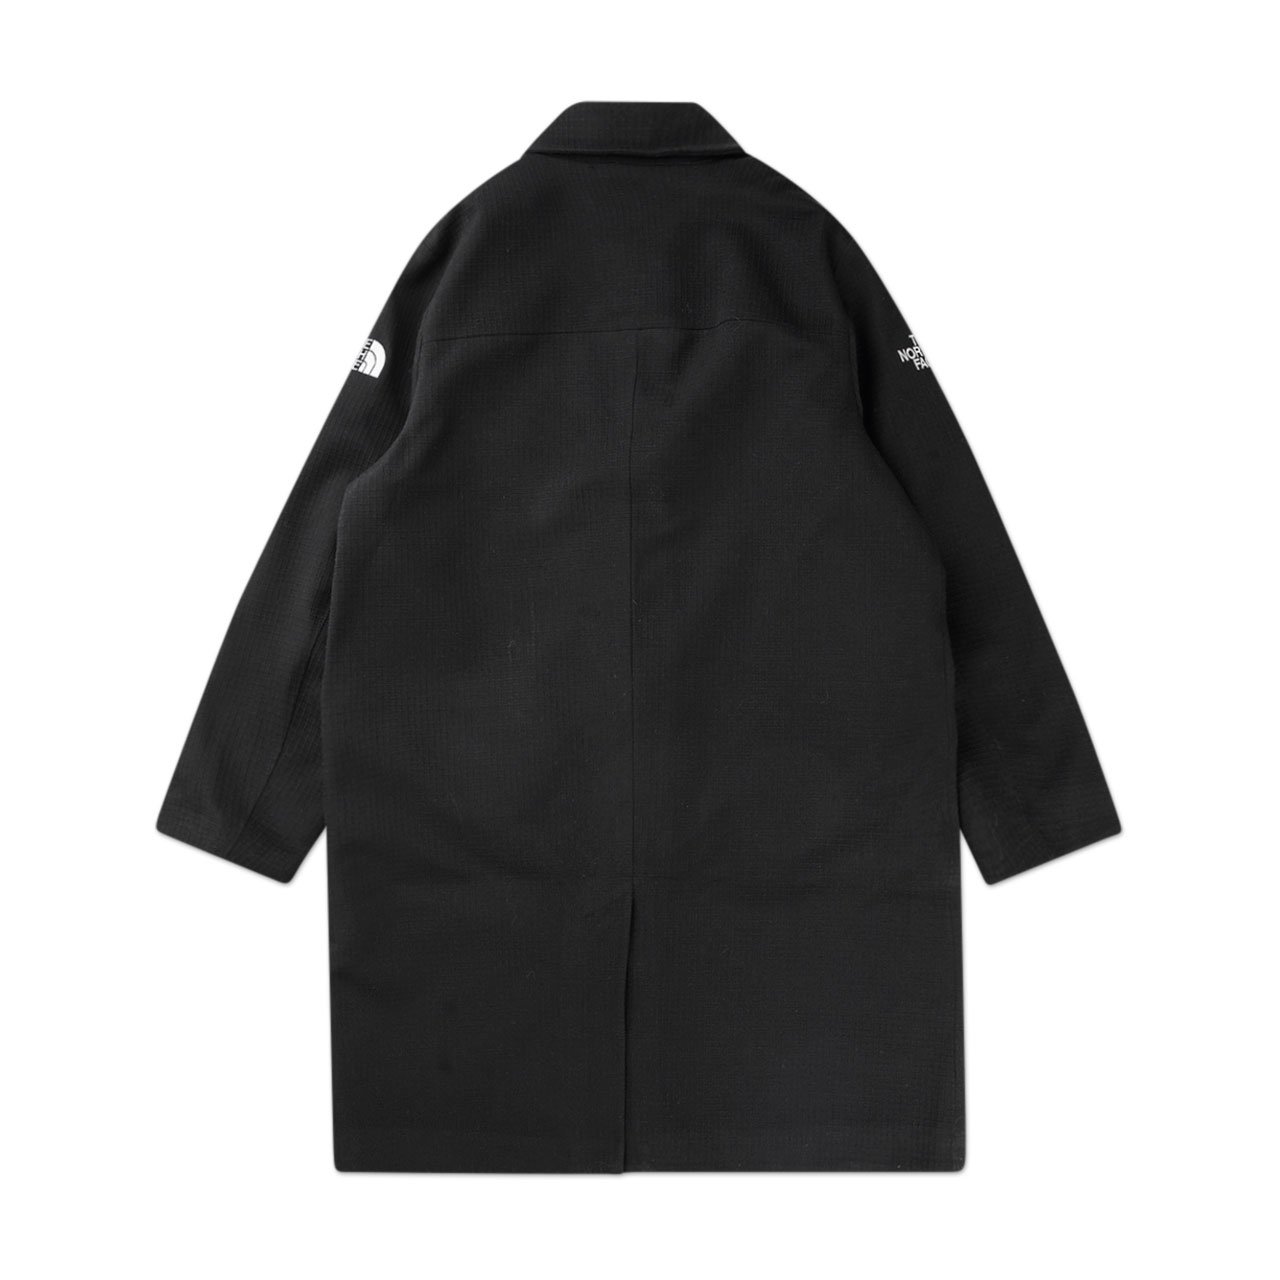 the north face black series tailor jacket (black) - nf0a4qxyjk3 - a.plus - Image - 2